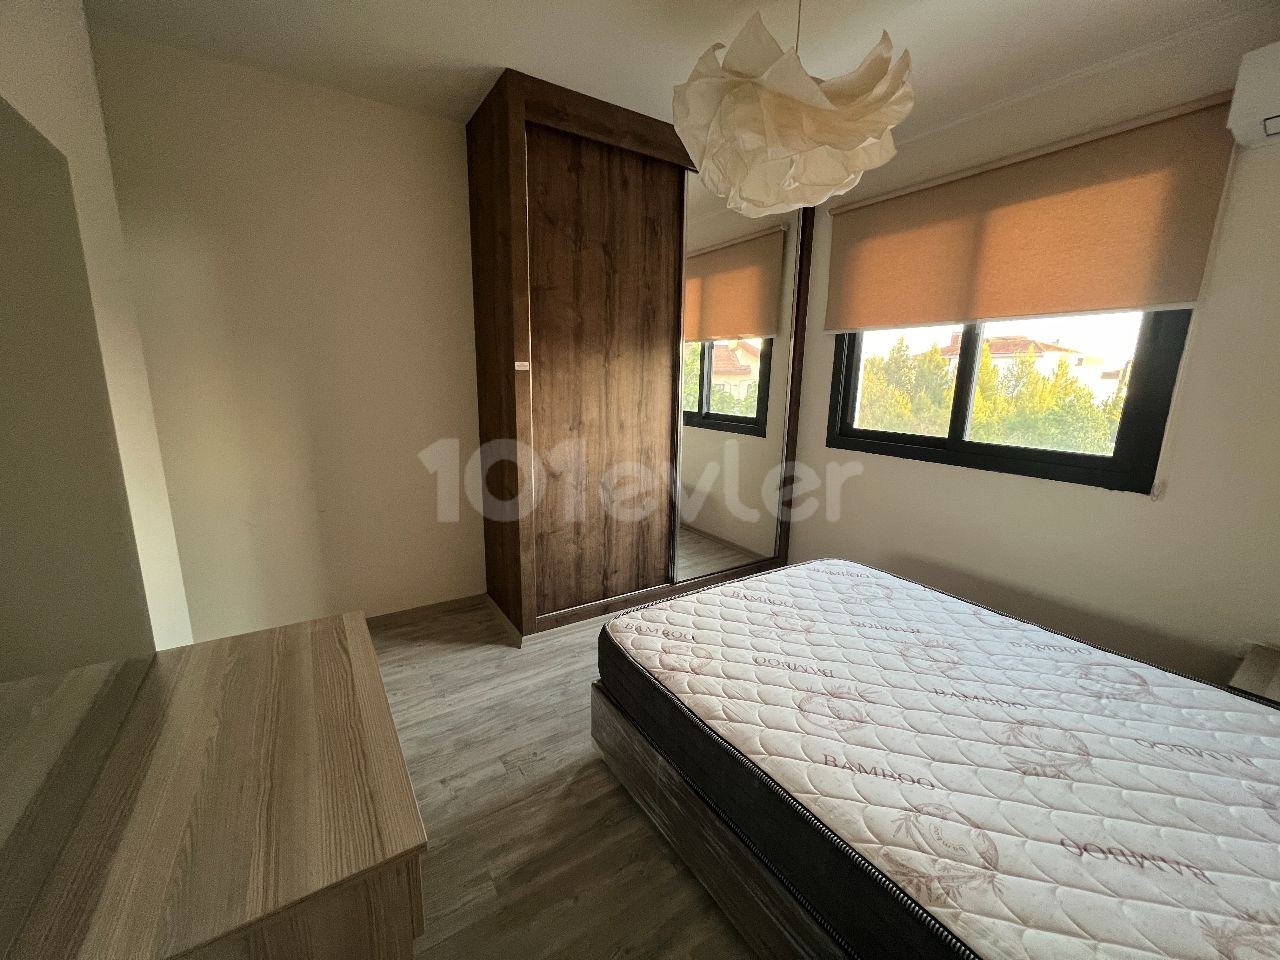 2+1 Furnished Flat for Rent in Gönyeli Area